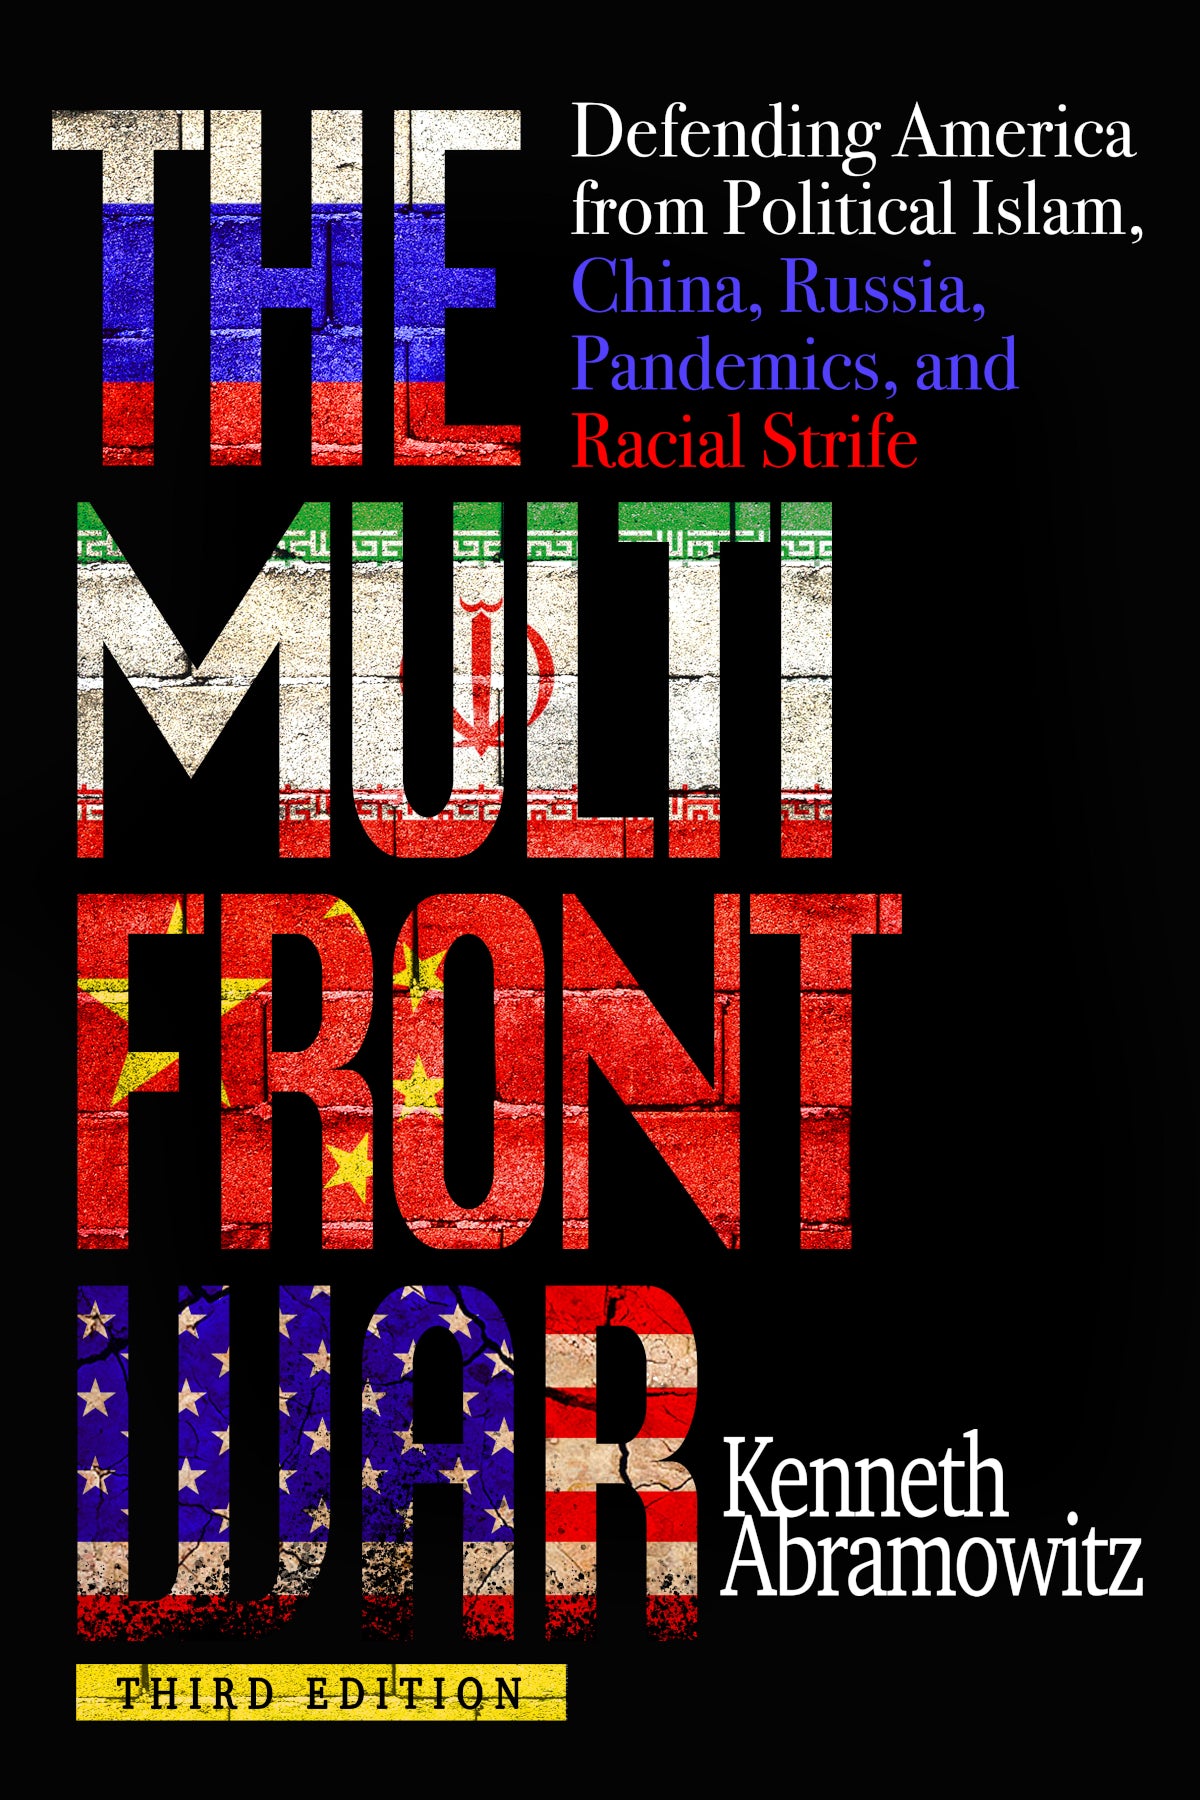 The Multifront War cover, with words of title and subtitle over flags of Russia, Iran, China, and the US